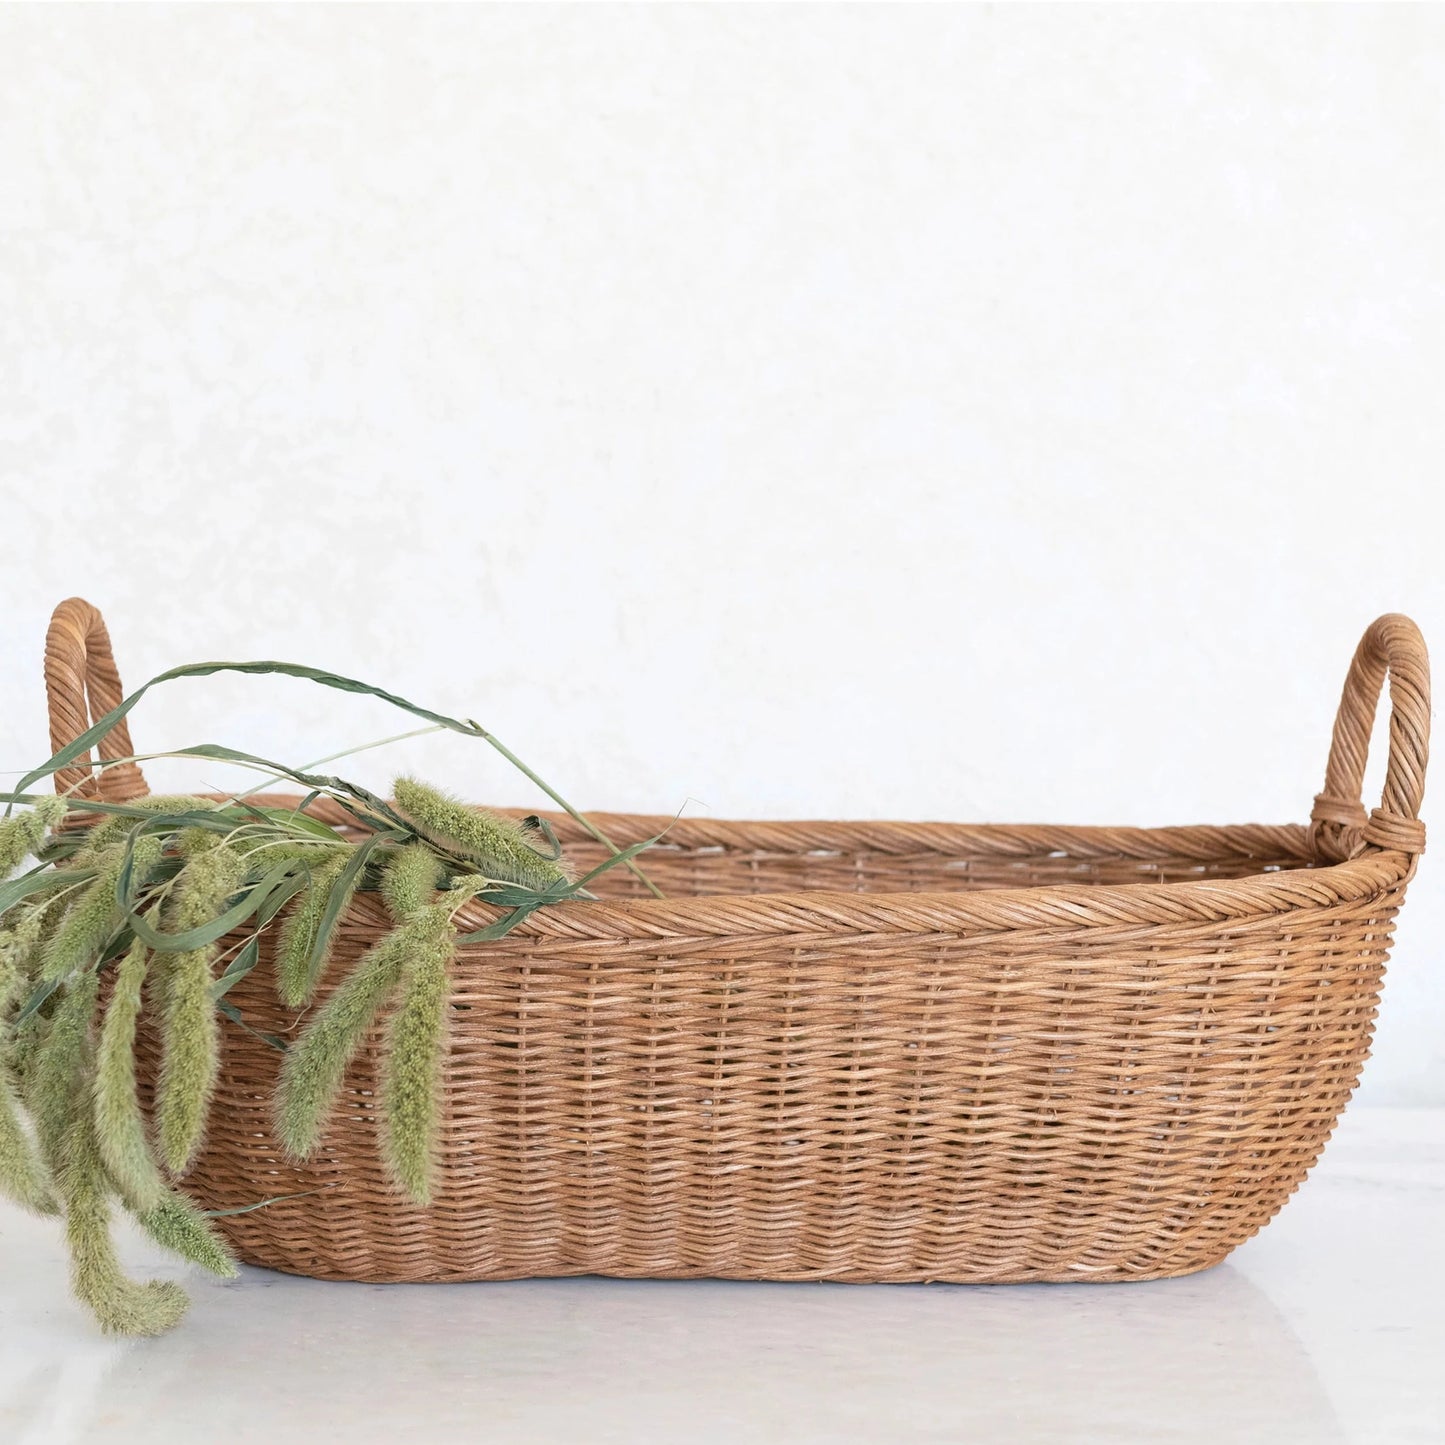 Hand-Woven Wicker Basket with Handles